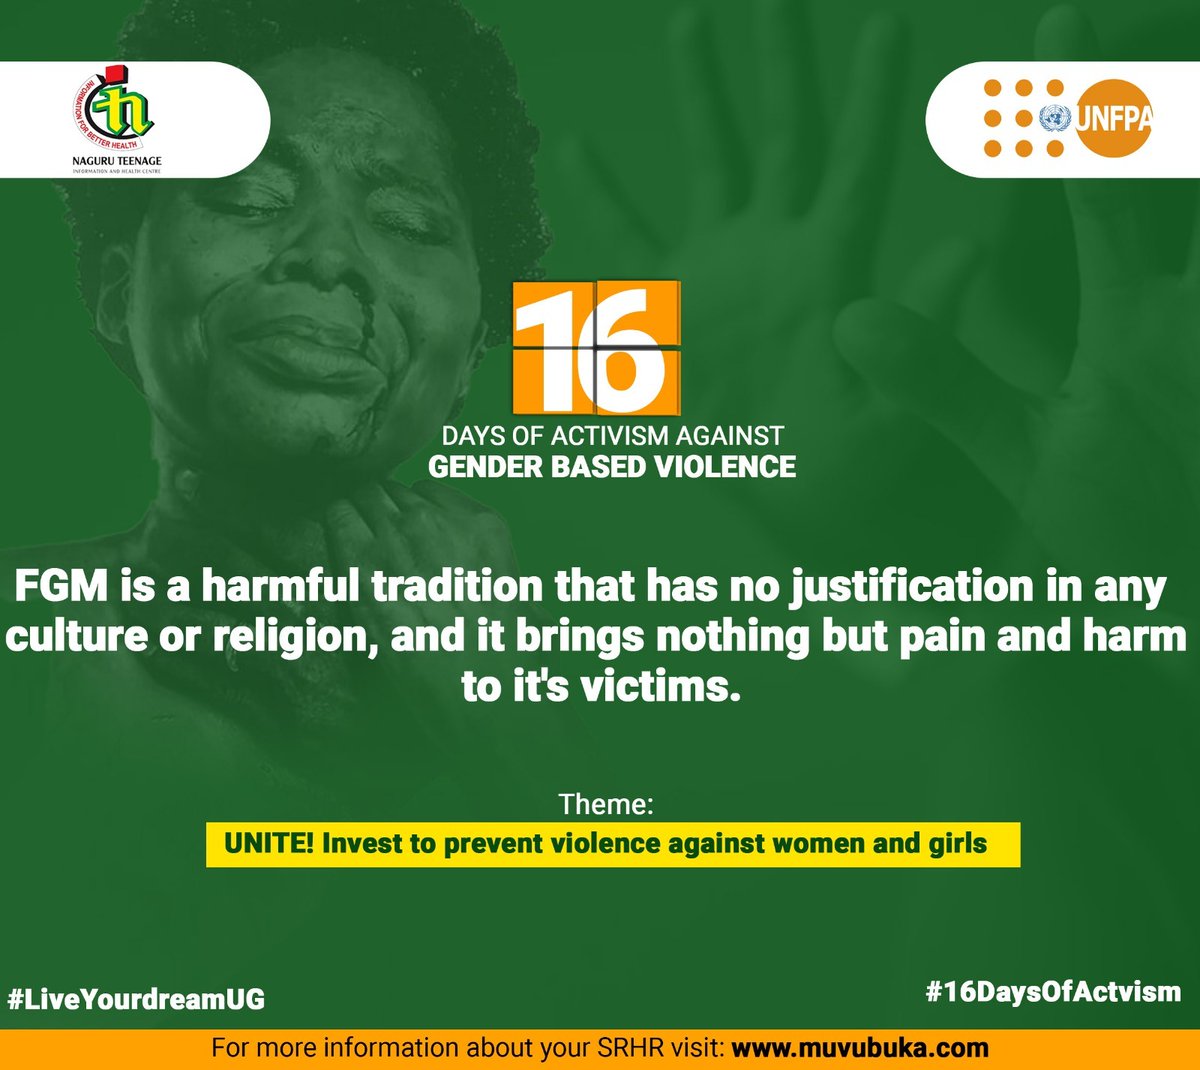 As we celebrate #16DaysOfActivism, let's prioritize using data to stop FGM, especially in communities where GBV and FGM are co-occurring.

Not to mention, a community that engages in FGM exploits women's sexuality and autonomy.
#LiveYourDreamUG